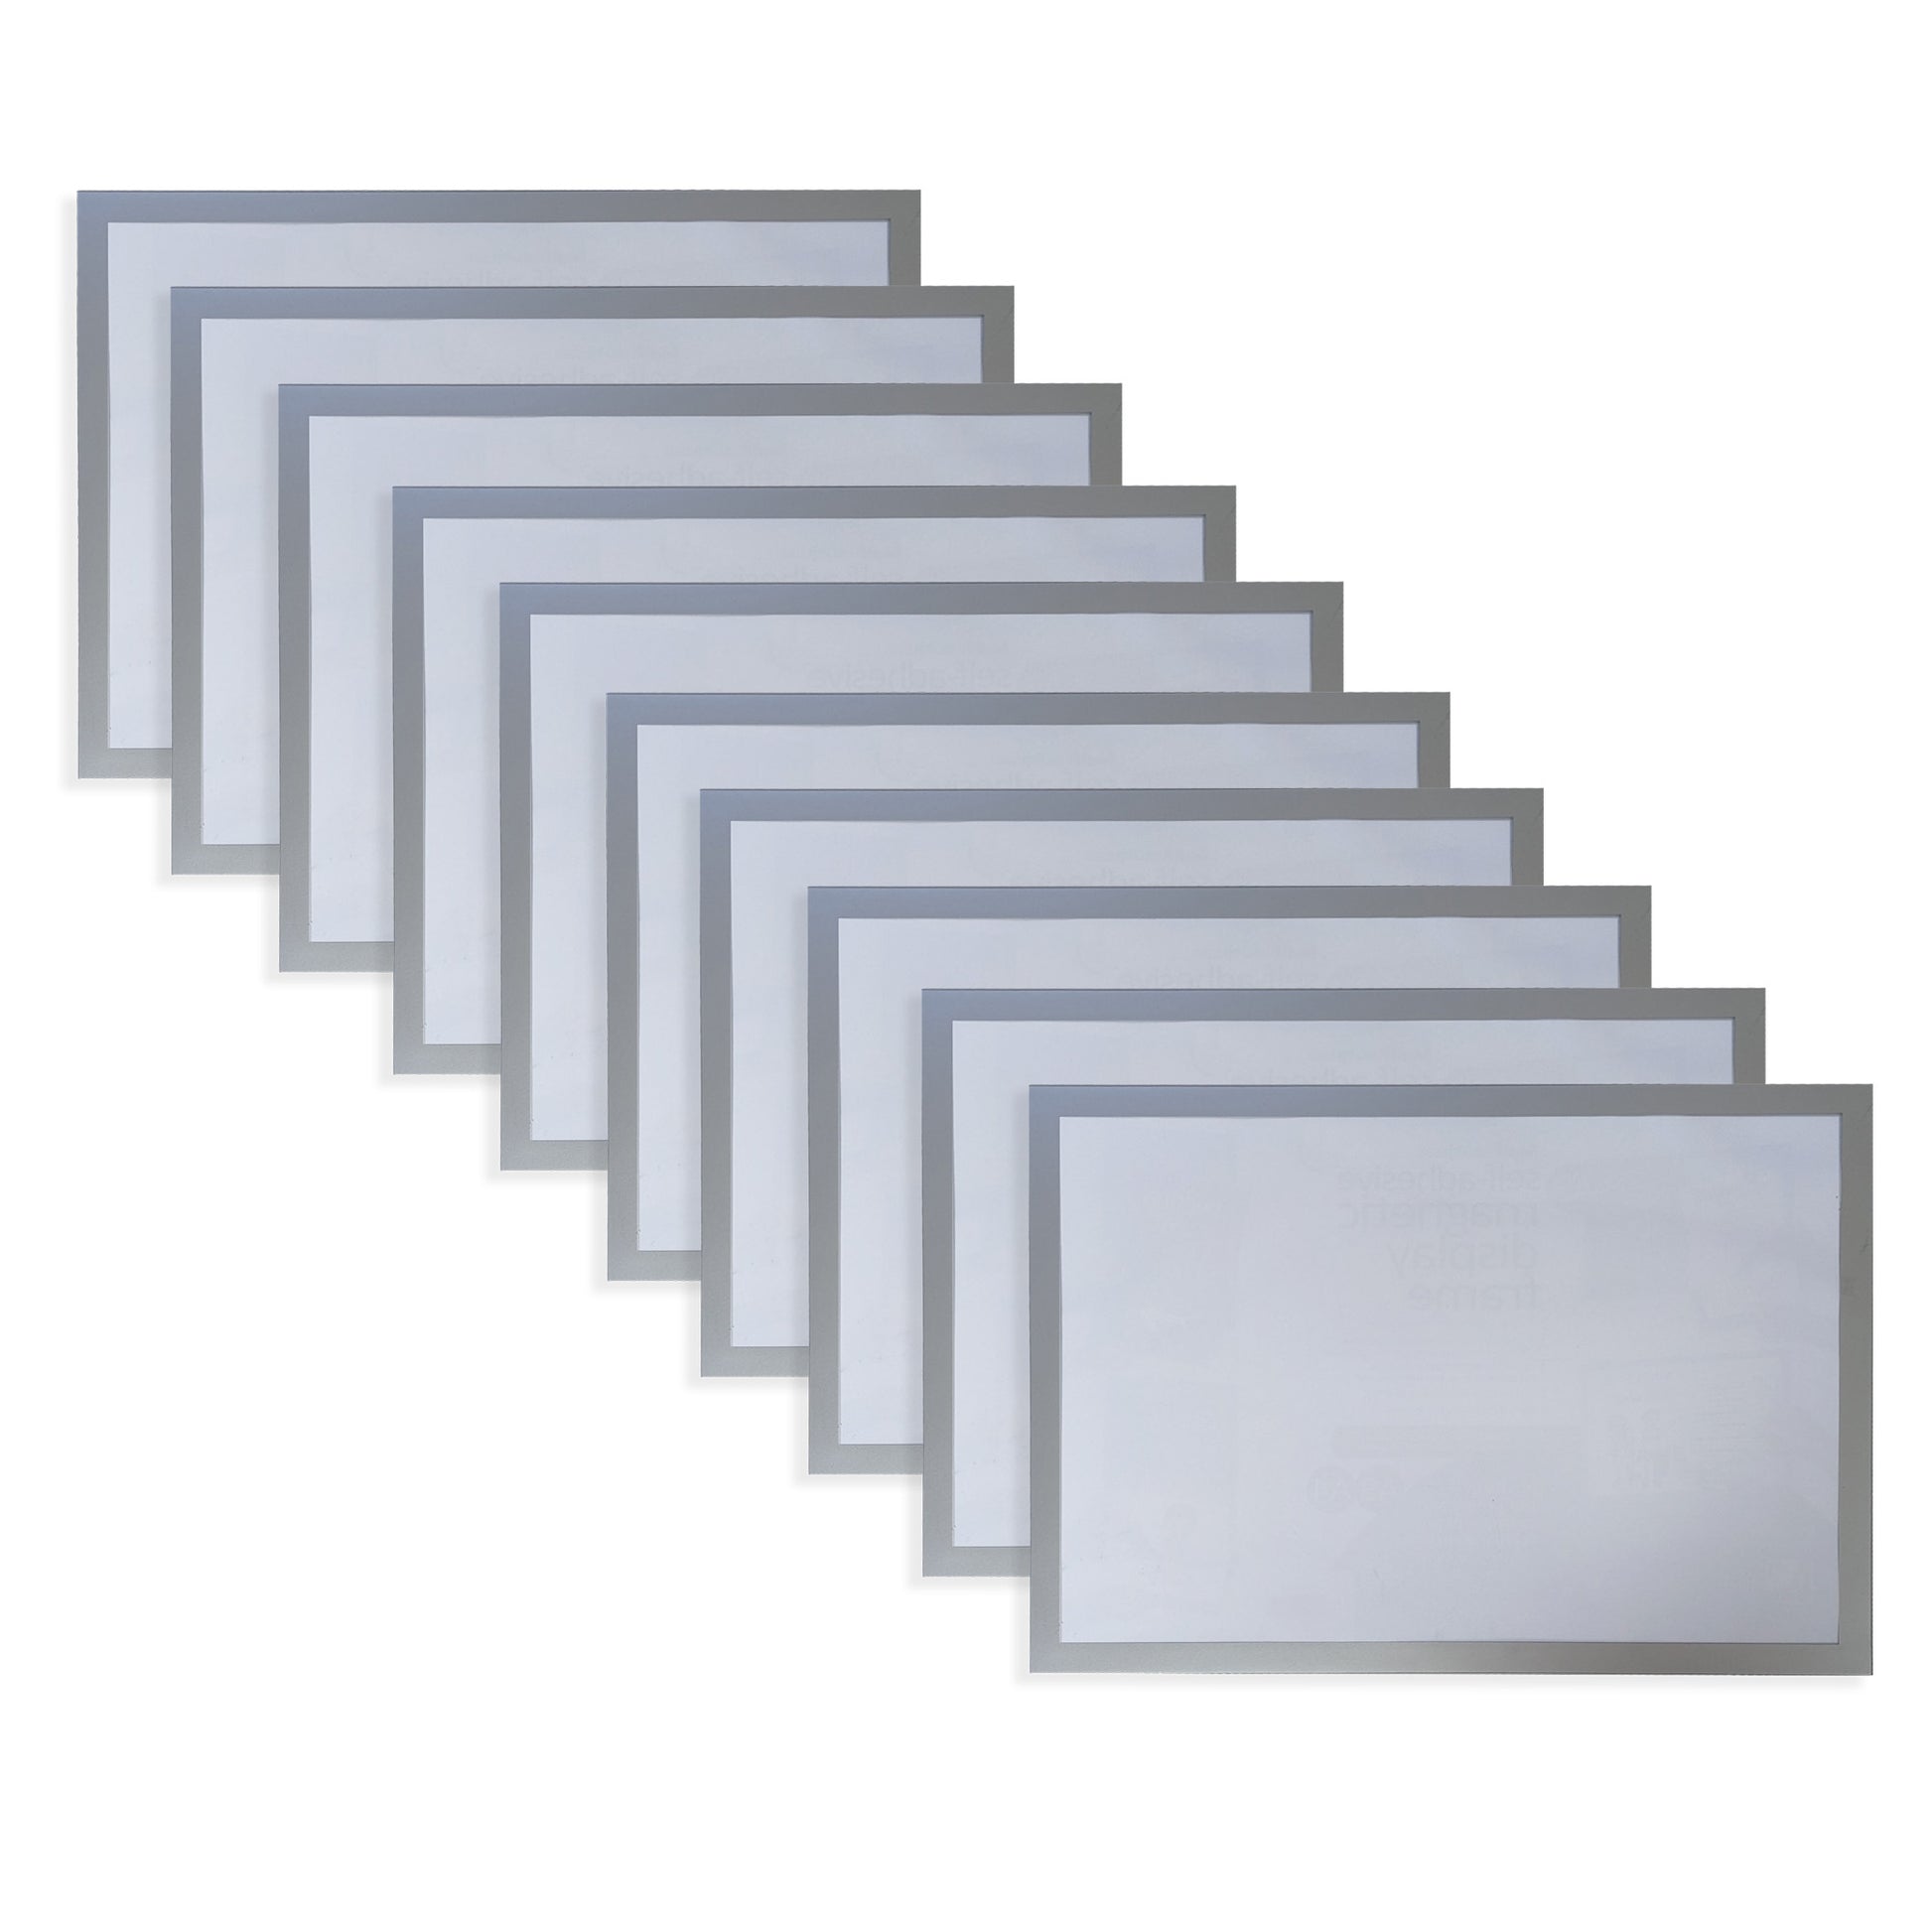 A stack of ten A3 self-adhesive magnetic display frames with translucent center and silver borders, displayed in a fan arrangement to show the multiple units included in the package.